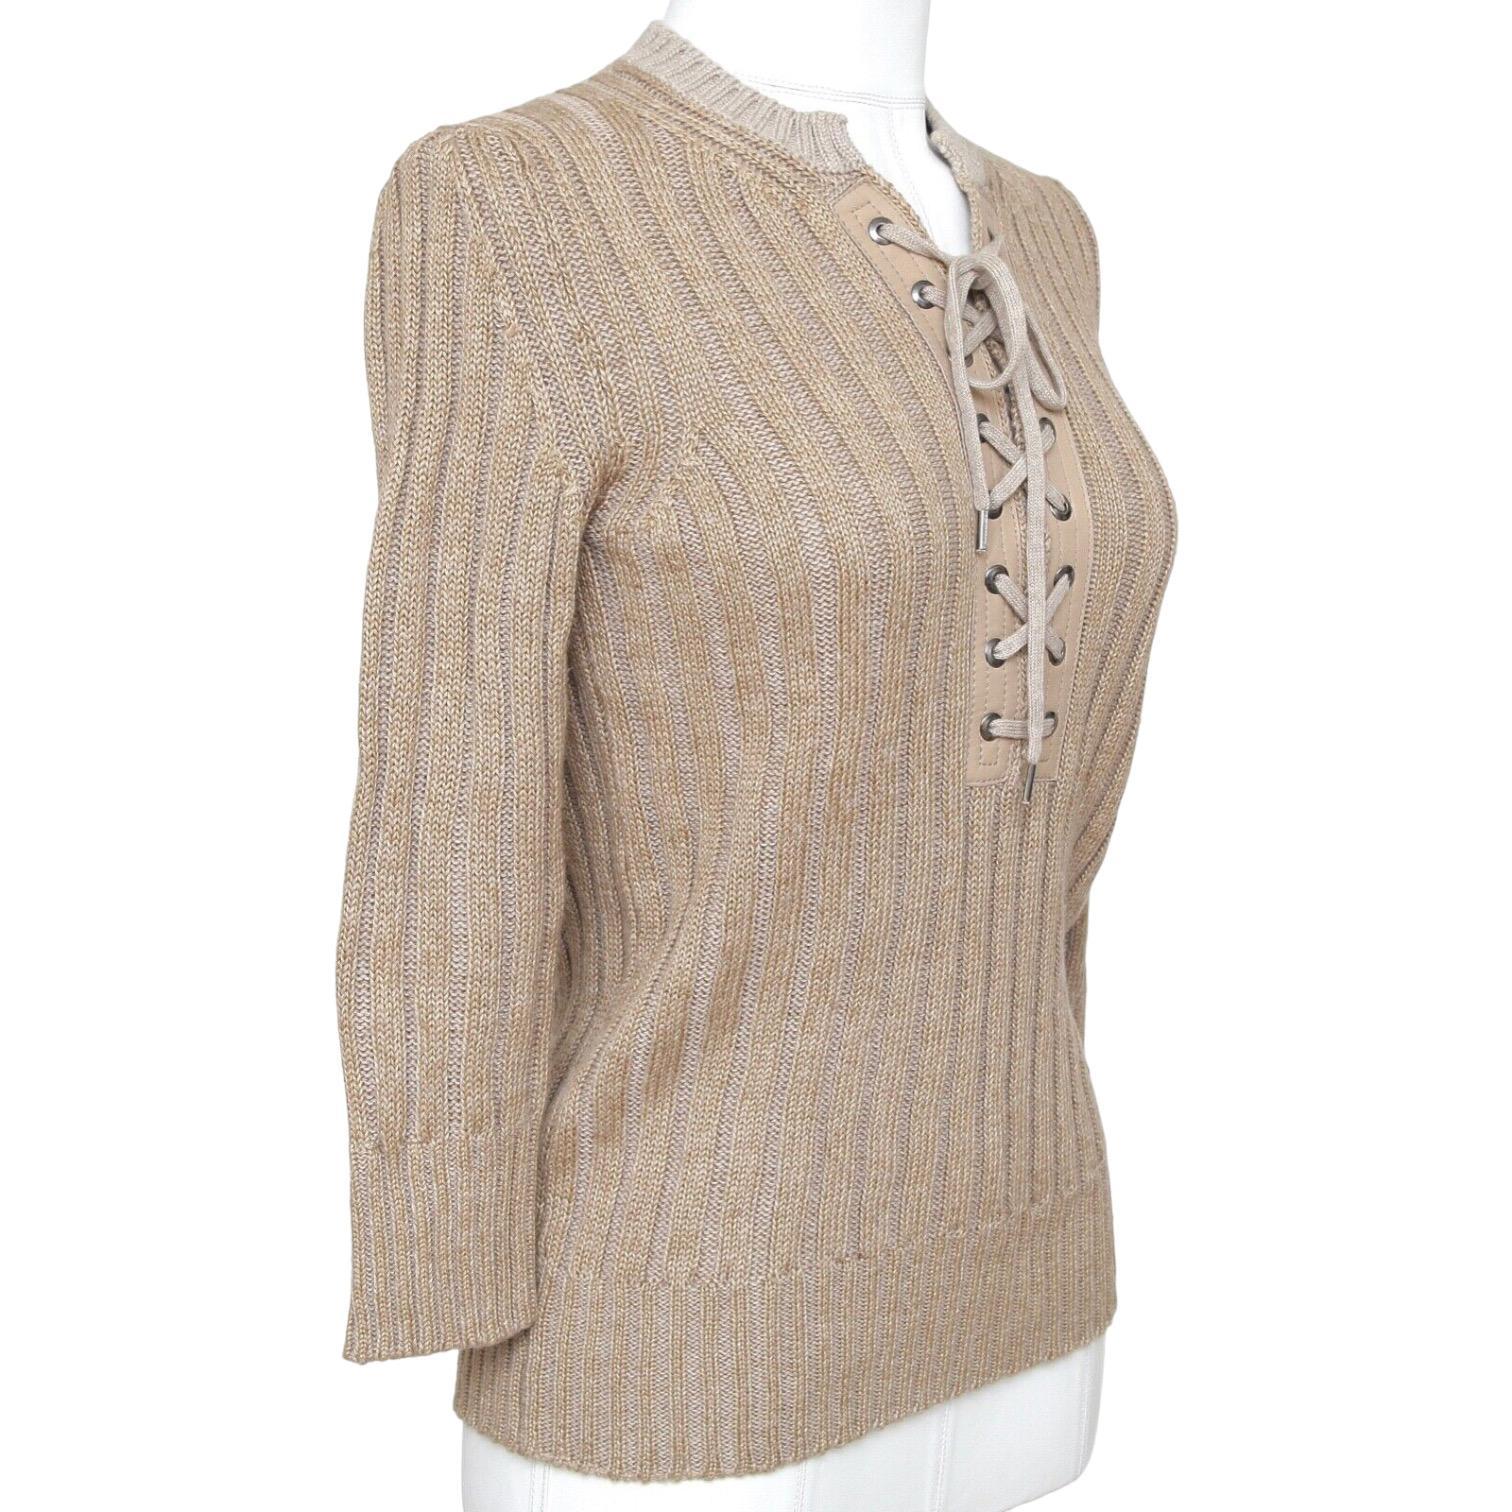 GUARANTEED AUTHENTIC CHLOE 2011 COLLECTION RIBBED LONG SLEEVE SWEATER LEATHER TRIM

Details:
• Very comfortable 3/4 sleeve ribbed sweater in a beige color.
• Henley style tie up front with leather trim.
• Long sleeves.
• Crew neck.

Material: 50%